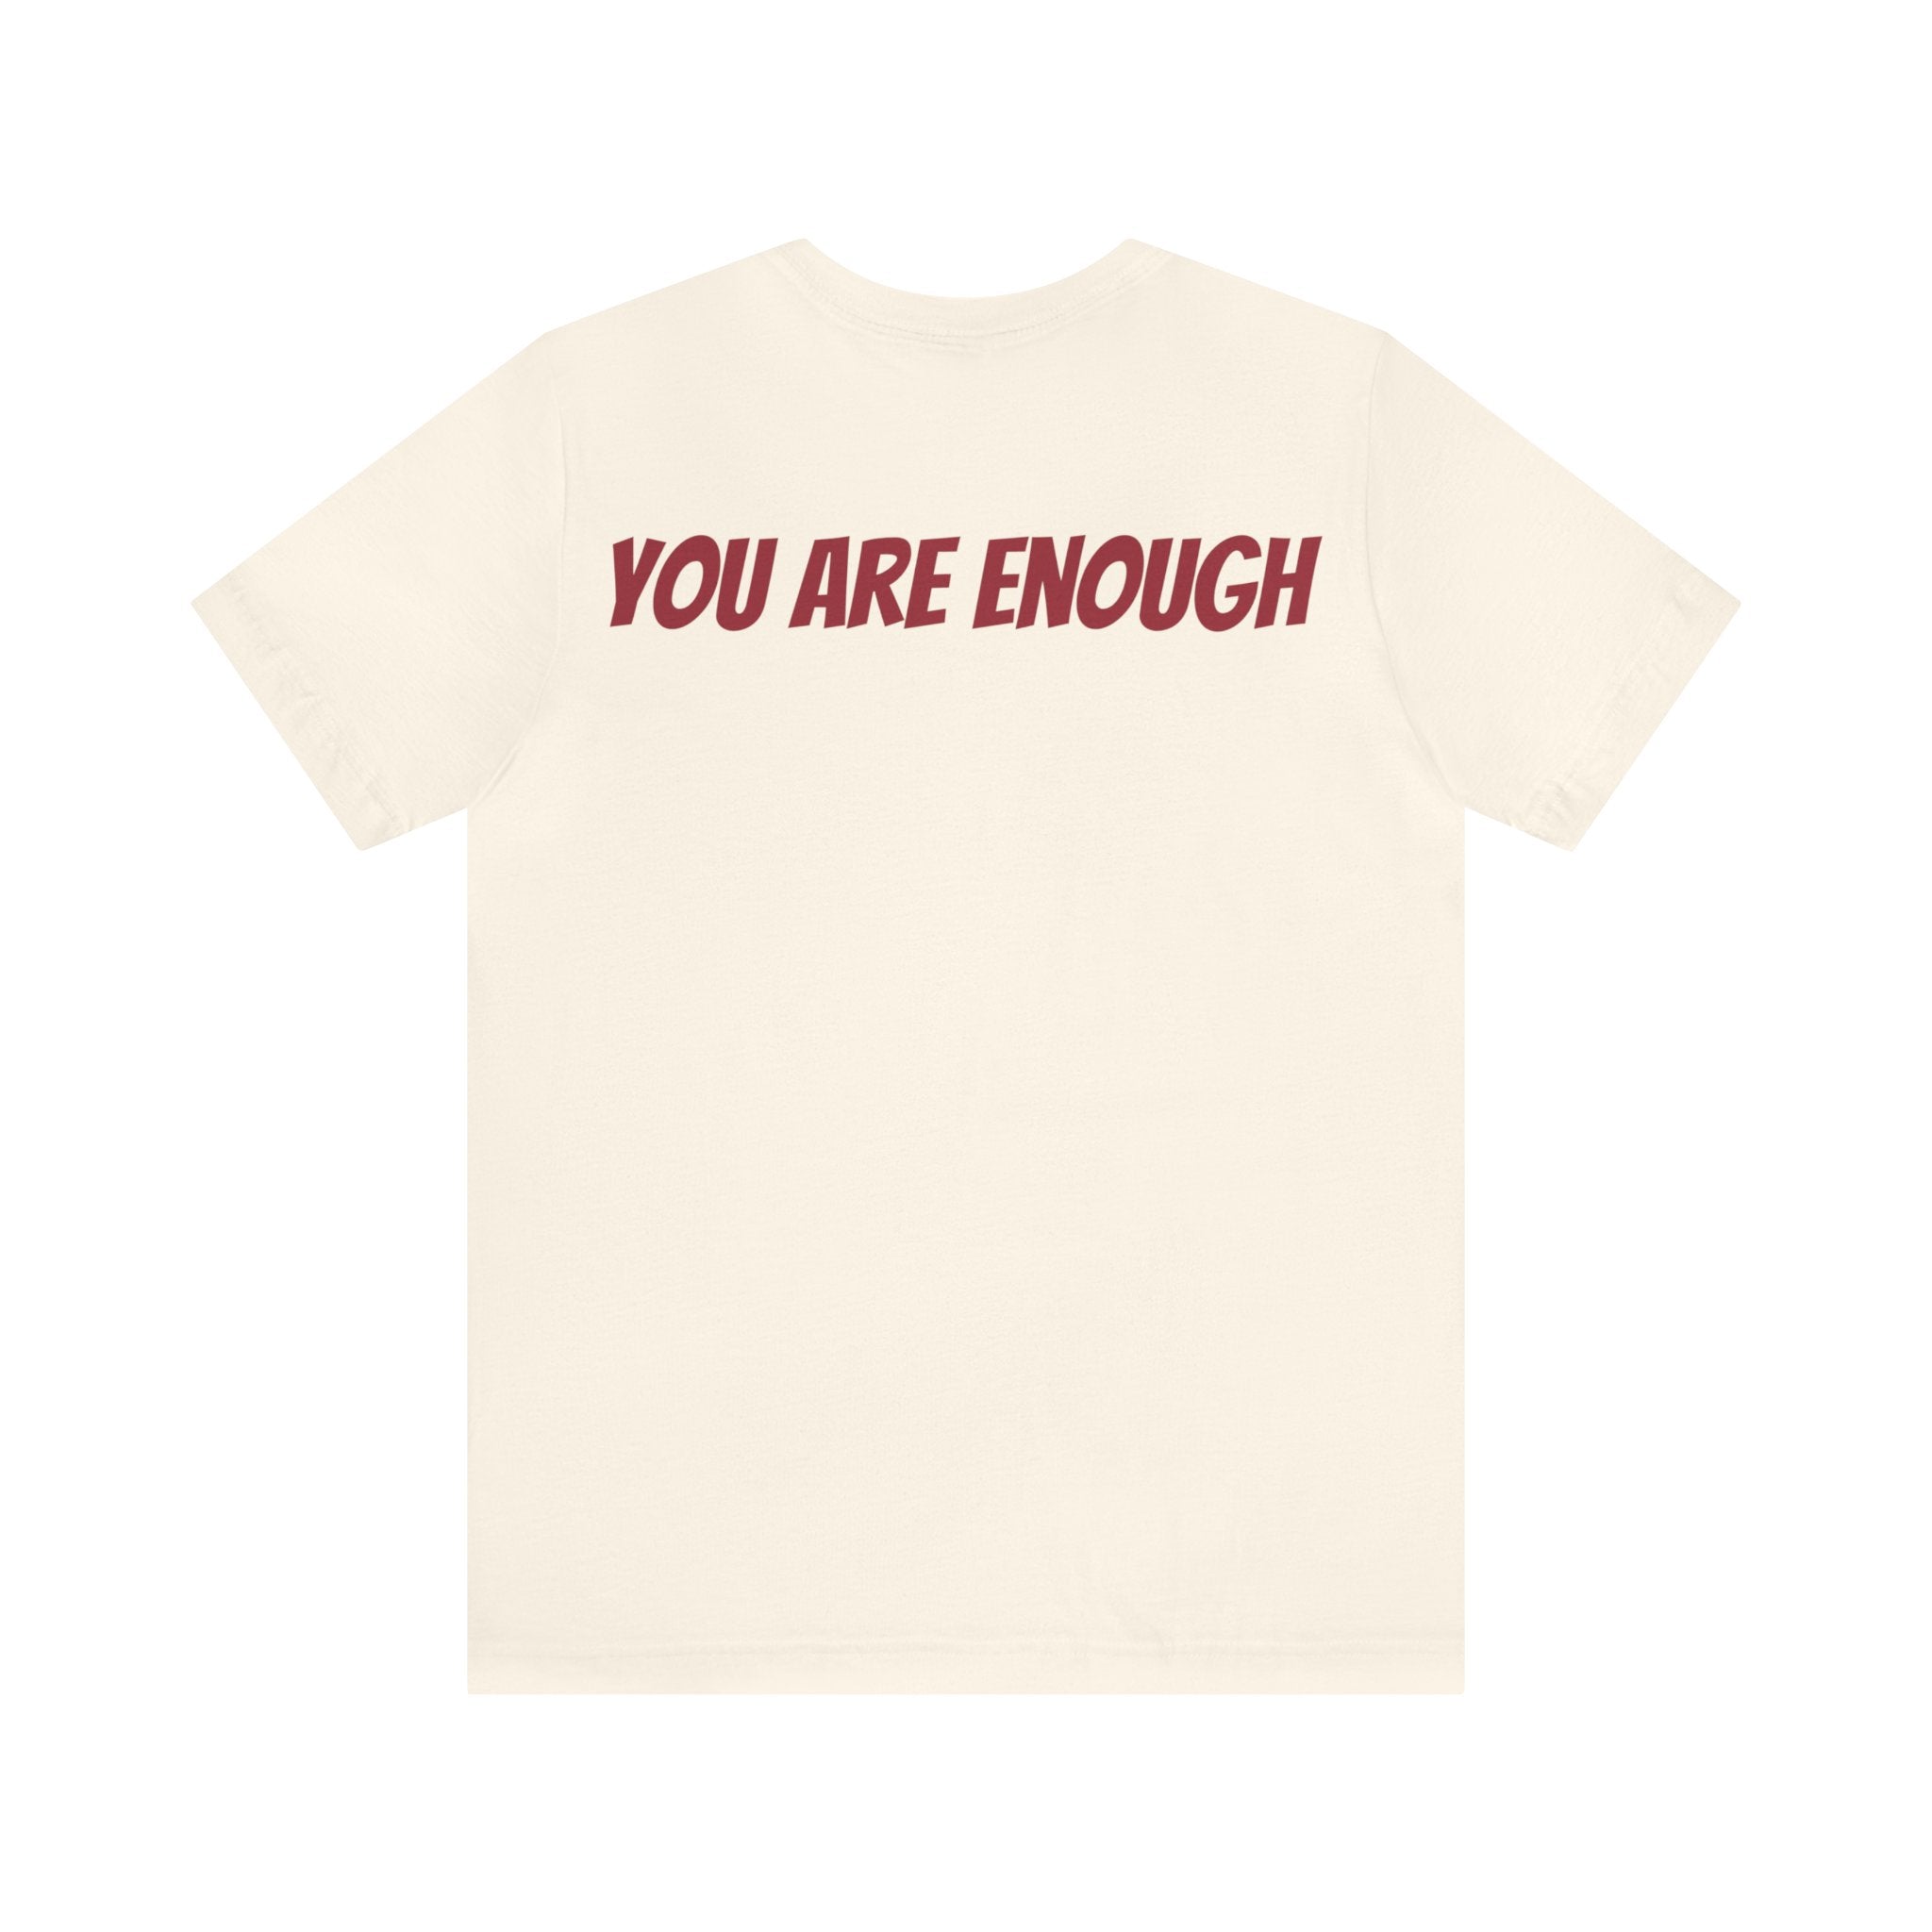 You Are Enough Short Sleeve Tee Bella+Canvas 3001 Heather Mauve Airlume Cotton Bella+Canvas 3001 Crew Neckline Jersey Short Sleeve Lightweight Fabric Mental Health Support Retail Fit Tear-away Label Tee Unisex Tee T-Shirt 15645379144478955900_2048 Printify